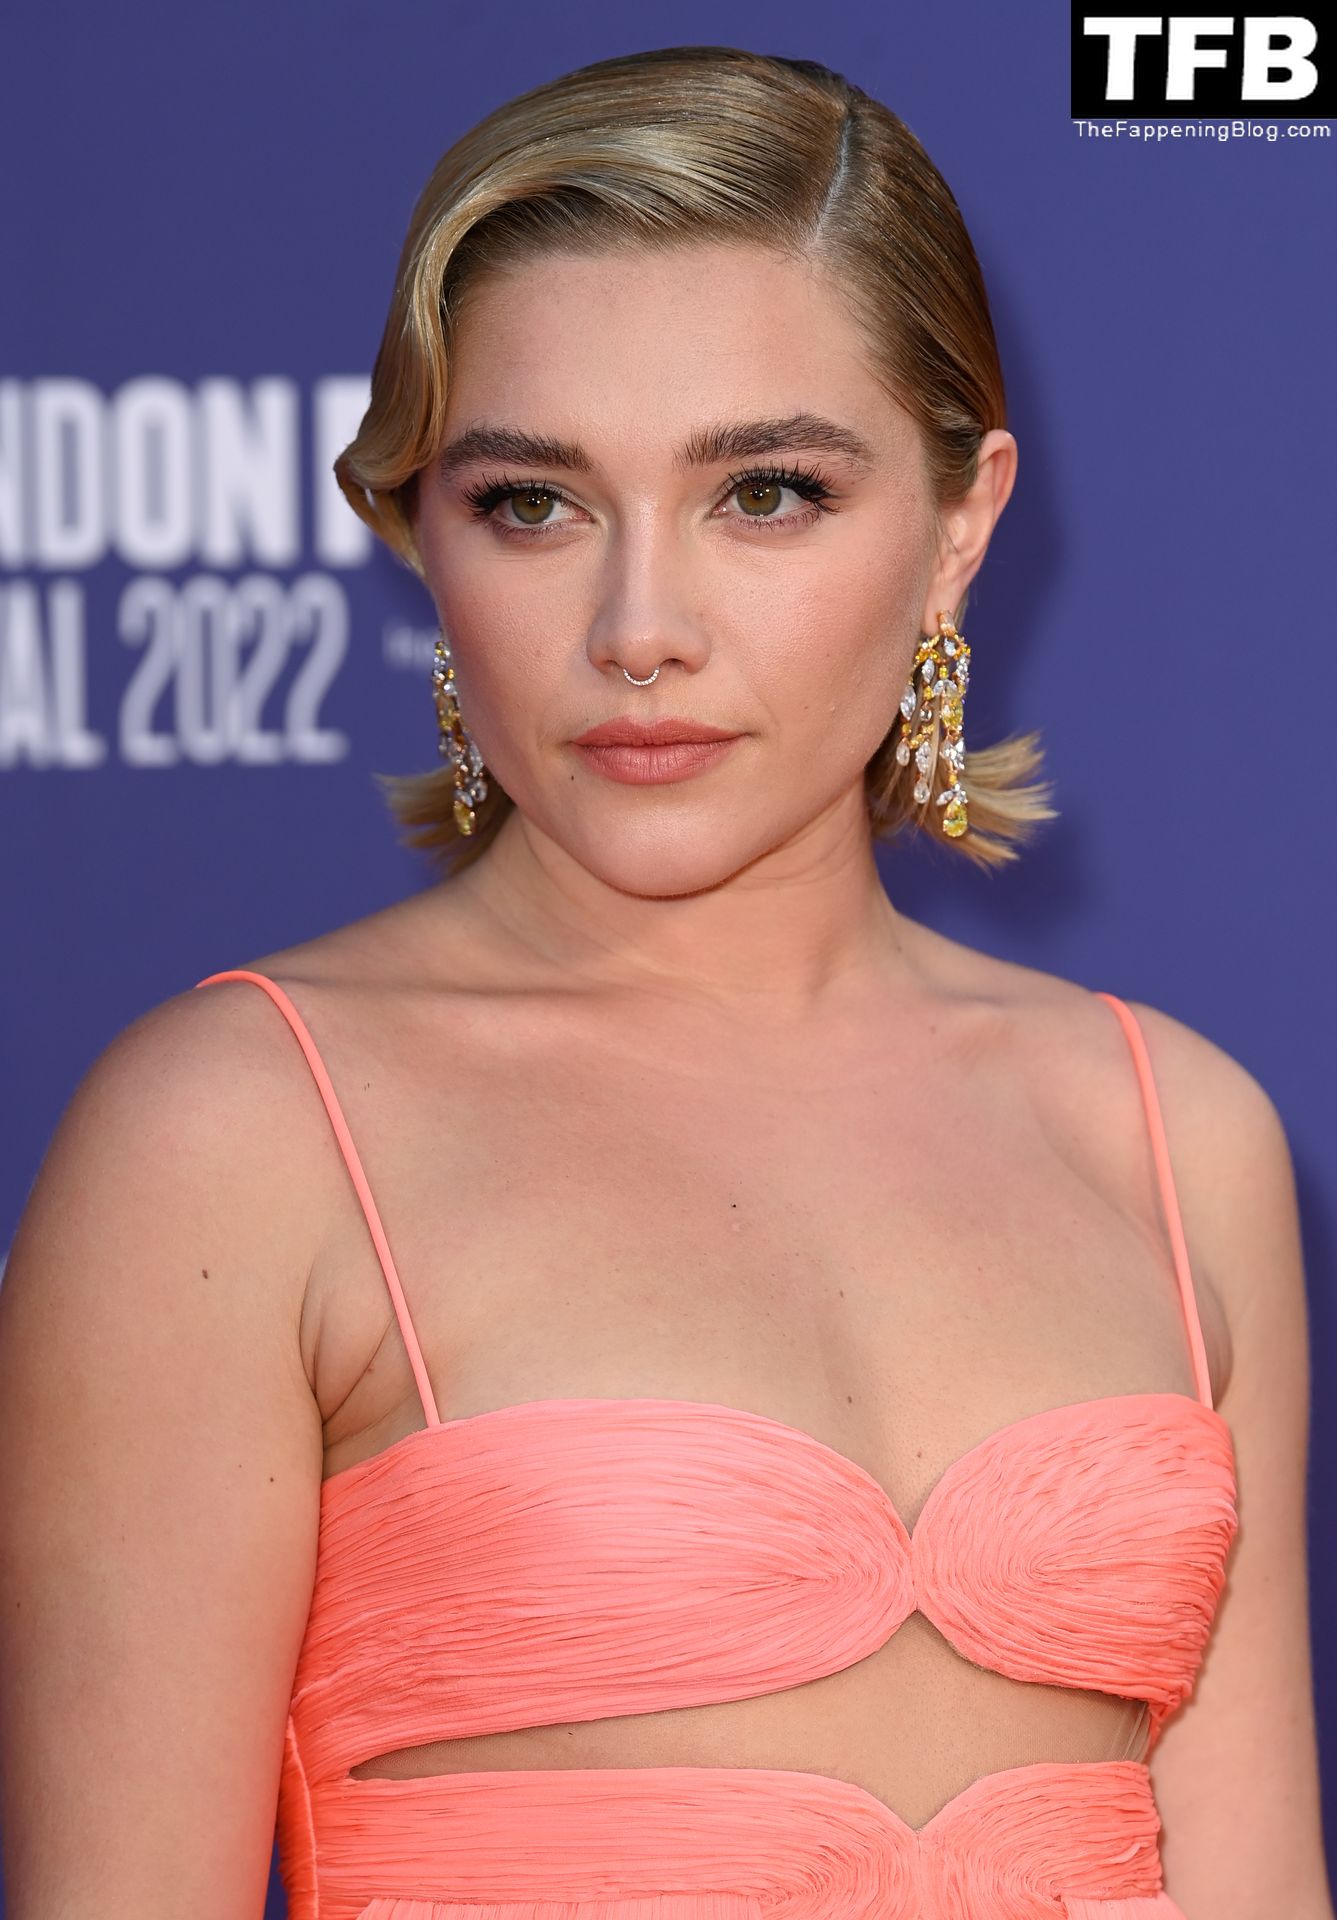 Florence-Pugh-Sexy-The-Fappening-Blog-53-1.jpg